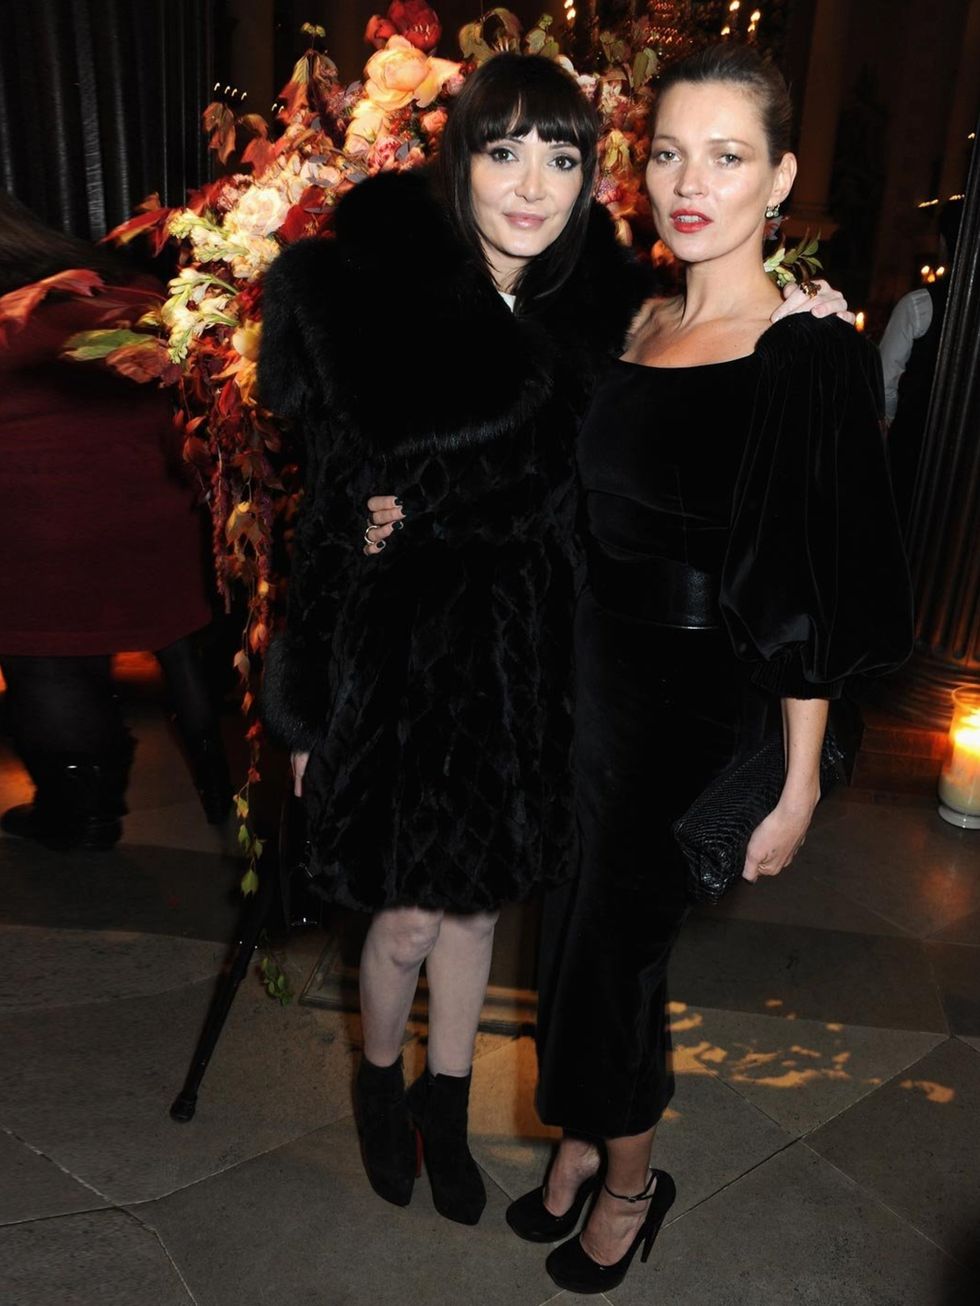 <p>Annabelle Neilson and <a href="http://www.elleuk.com/star-style/celebrity-style-files/kate-moss">Kate Moss</a>  at the <a href="http://www.elleuk.com/catwalk/designer-a-z/alexander-mcqueen/">Alexander McQueen</a> and Frieze dinner to celebrate the open